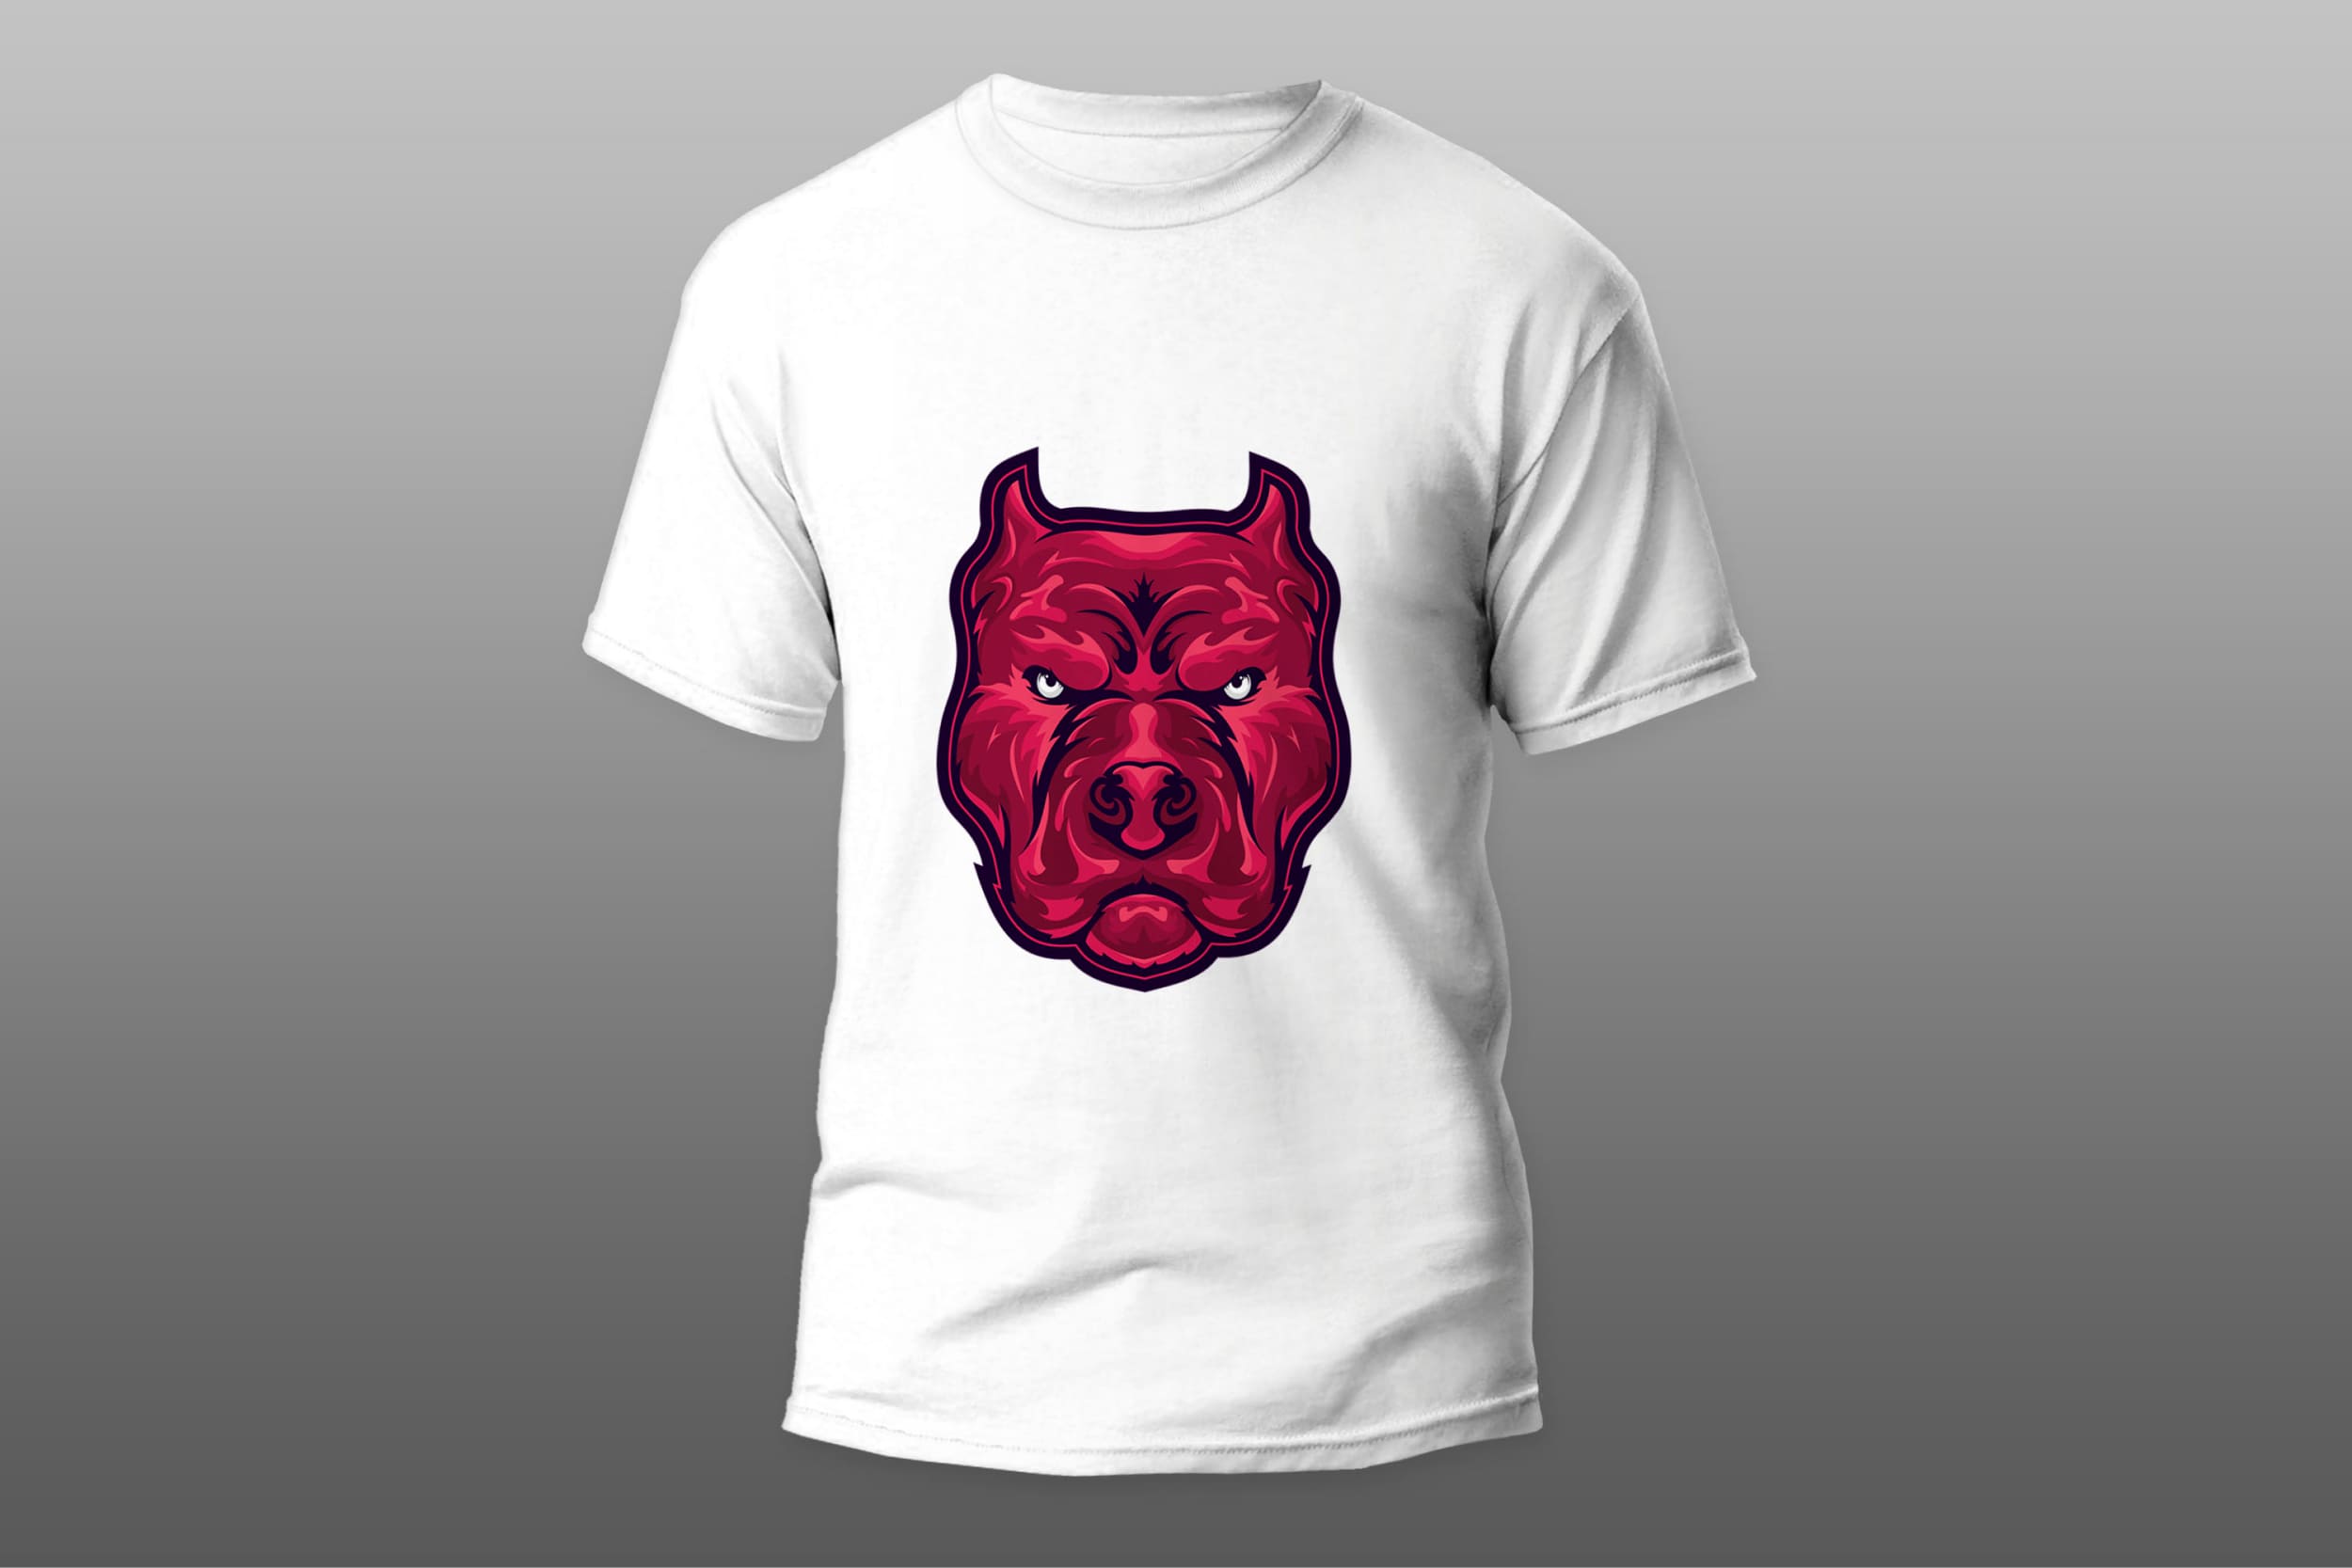 White T-shirt with a pink pitbull face on a gray gradient background.